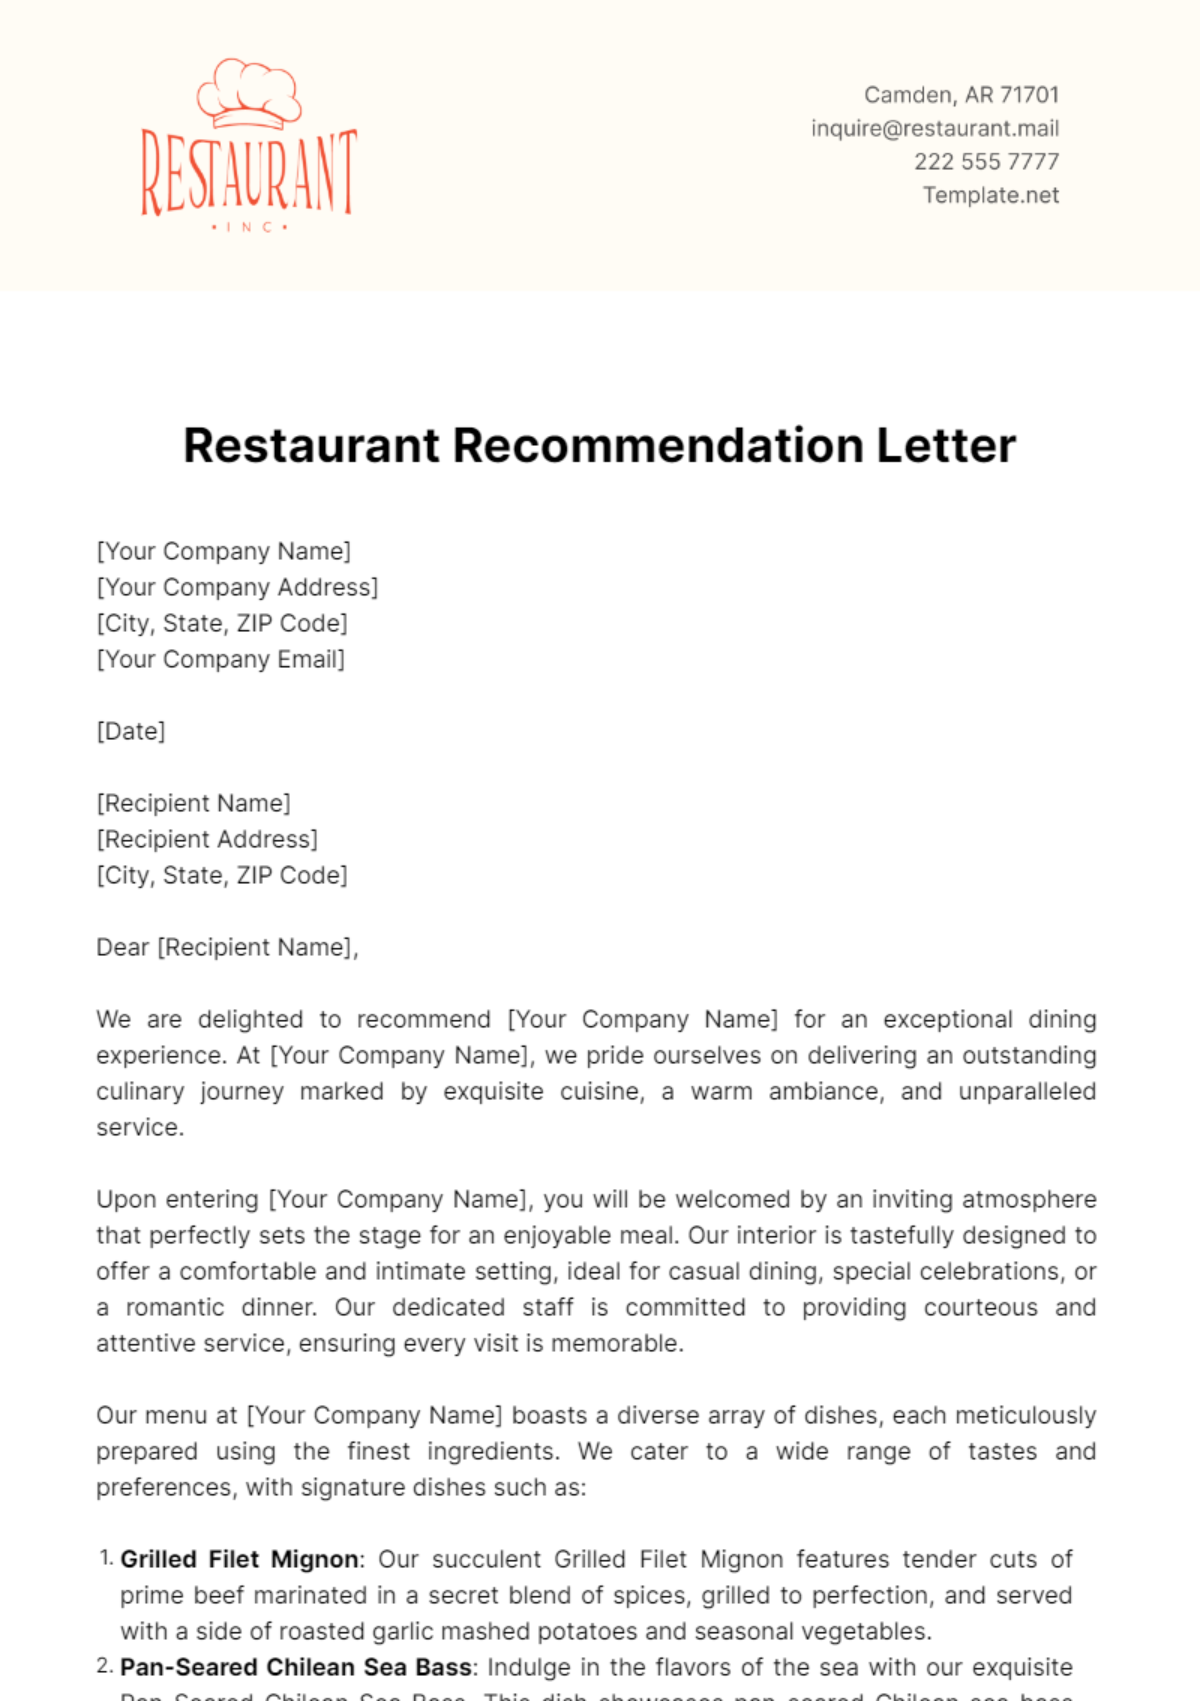 Free Restaurant Recommendation Letter Template